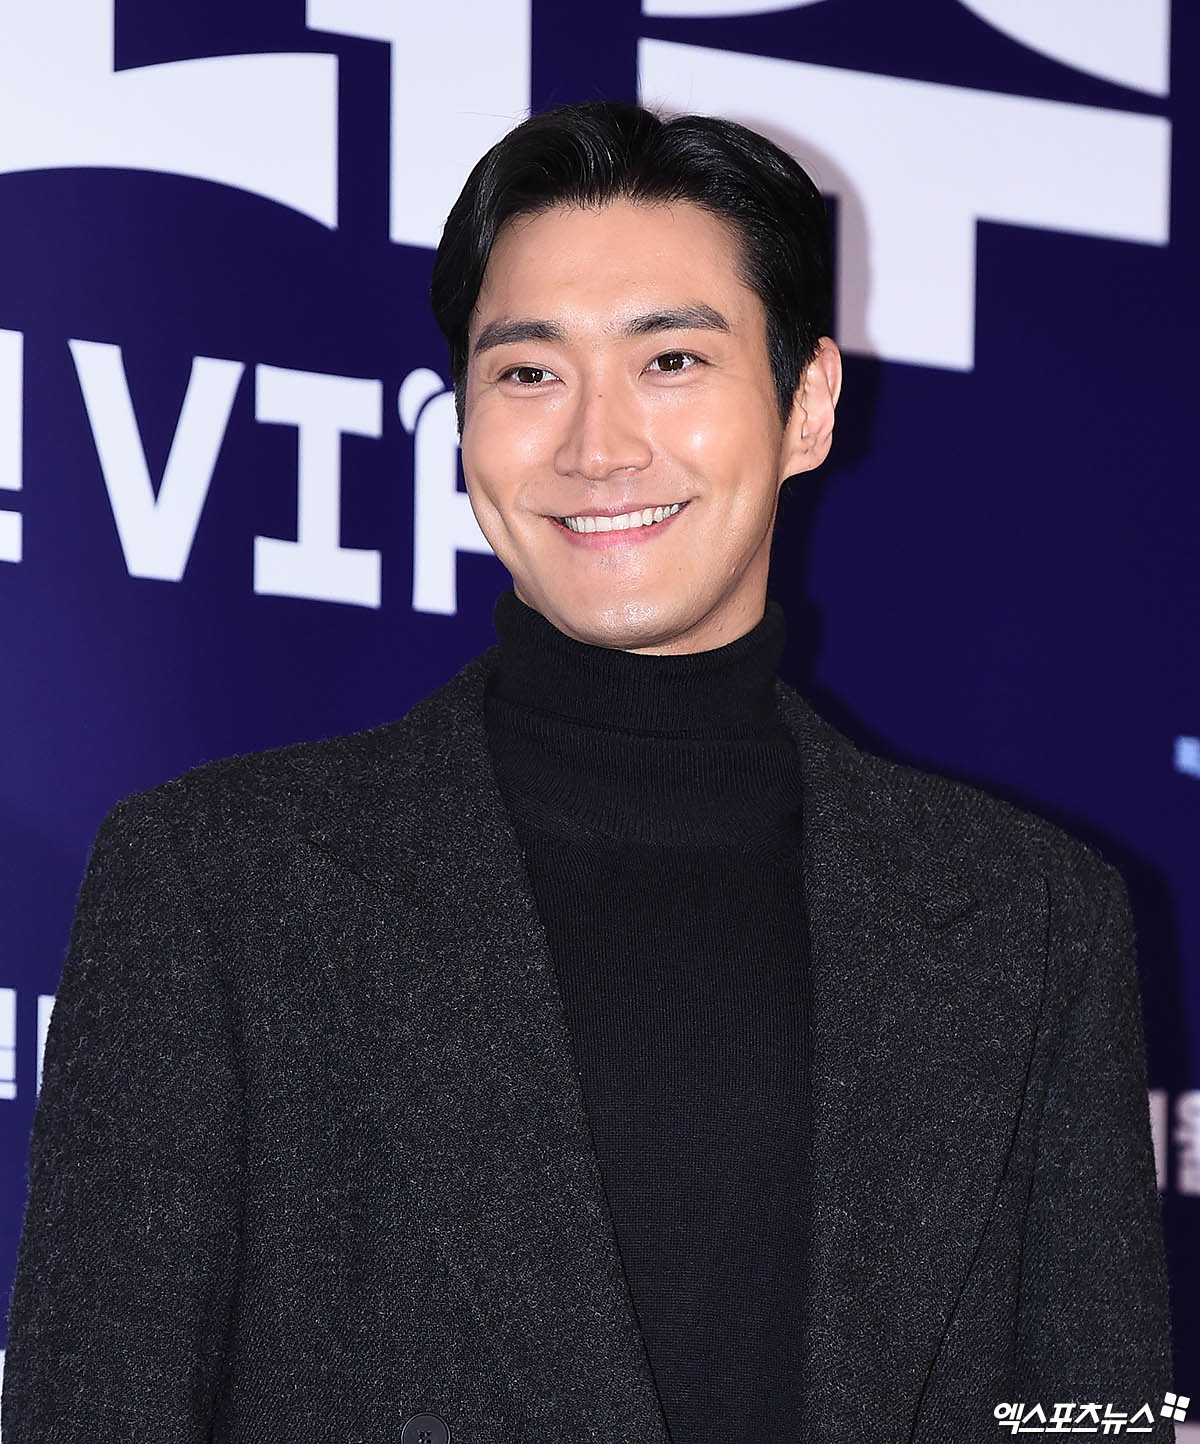 Group Super Junior Choi Siwon has revealed to be careful of SNS impersonation accounts.Choi Siwon said on his instagram on the 1st, I have a fact to tell you before the festival of yesterday.Ive been informed that there is an account that funds donations under the guise of me. Please be careful.We are sponsoring only the official site, the legal foundation, and the nonprofit within the boundaries of the law.I also do not ask for 1:1 chat with my personal account in connection with the donation. In the public photos, a person who impersonates Choi Siwon profiles a photo of Choi Siwon and asks several people to donate funds.In particular, Choi Siwon released the account ID and added, Beware!Meanwhile, Choi Siwon appeared on the online concert Super Junior Beyond Live on the 31st of last month.Here is a specialization in Choi Siwon writing:I have a message to inform you before yesterdays festival. Ive been informed that I have an account for fundraising donations. Please be careful.I sponsor only the official site, or the legal foundation, or the nonprofit within the boundaries of the law; and I also do not request a 1:1 chat from my personal account regarding the donation.Watch out!Photo = DB